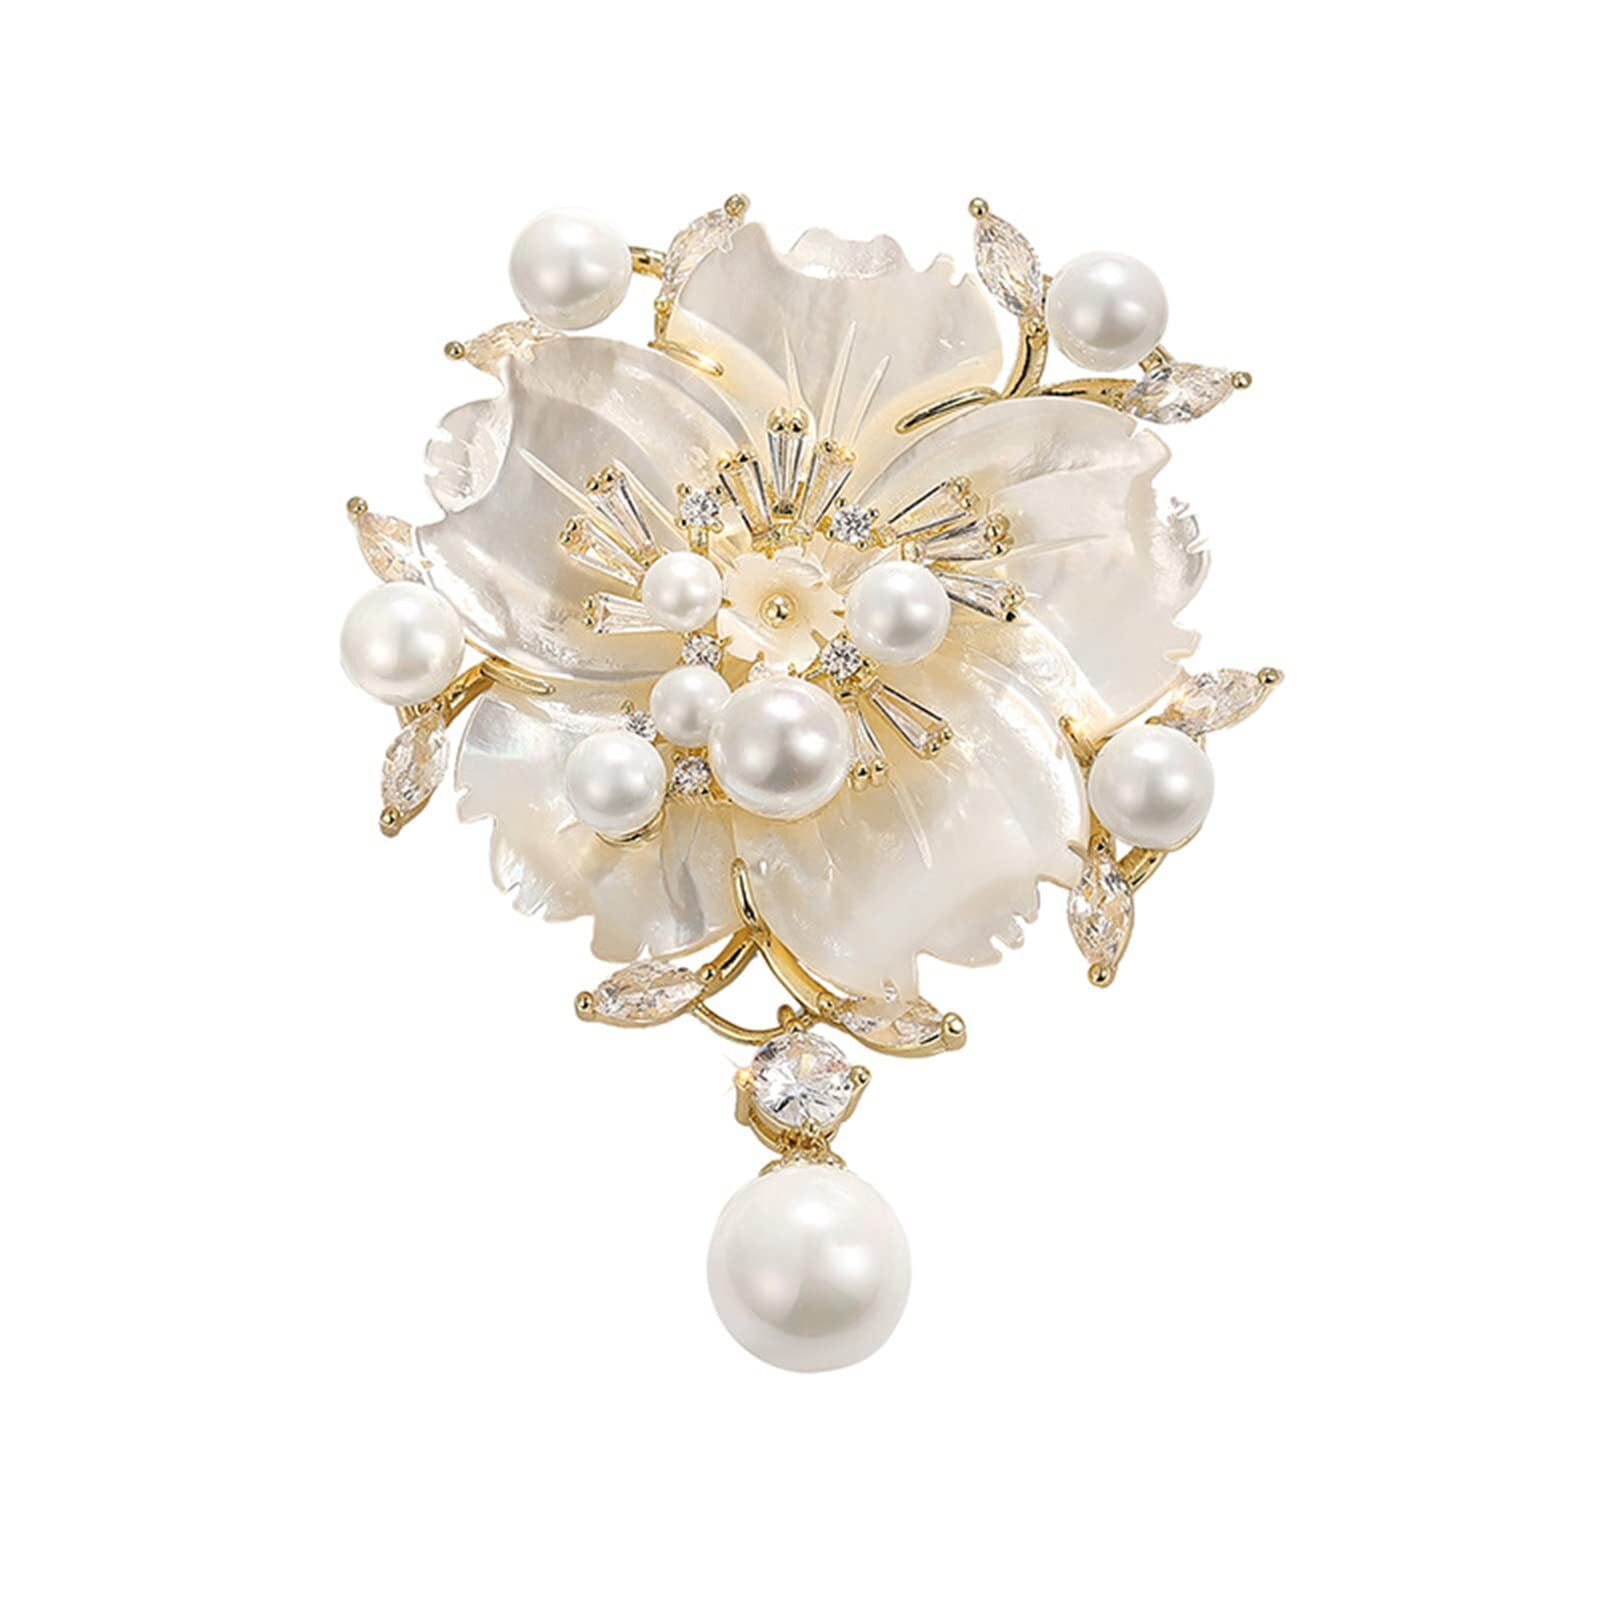 clberni Elegant Pearl Flower Designer Brooch Pins Broches Costume Jewelry for Women Fashion Christmas Gift, Women's, Size: 2.3 x 1.3